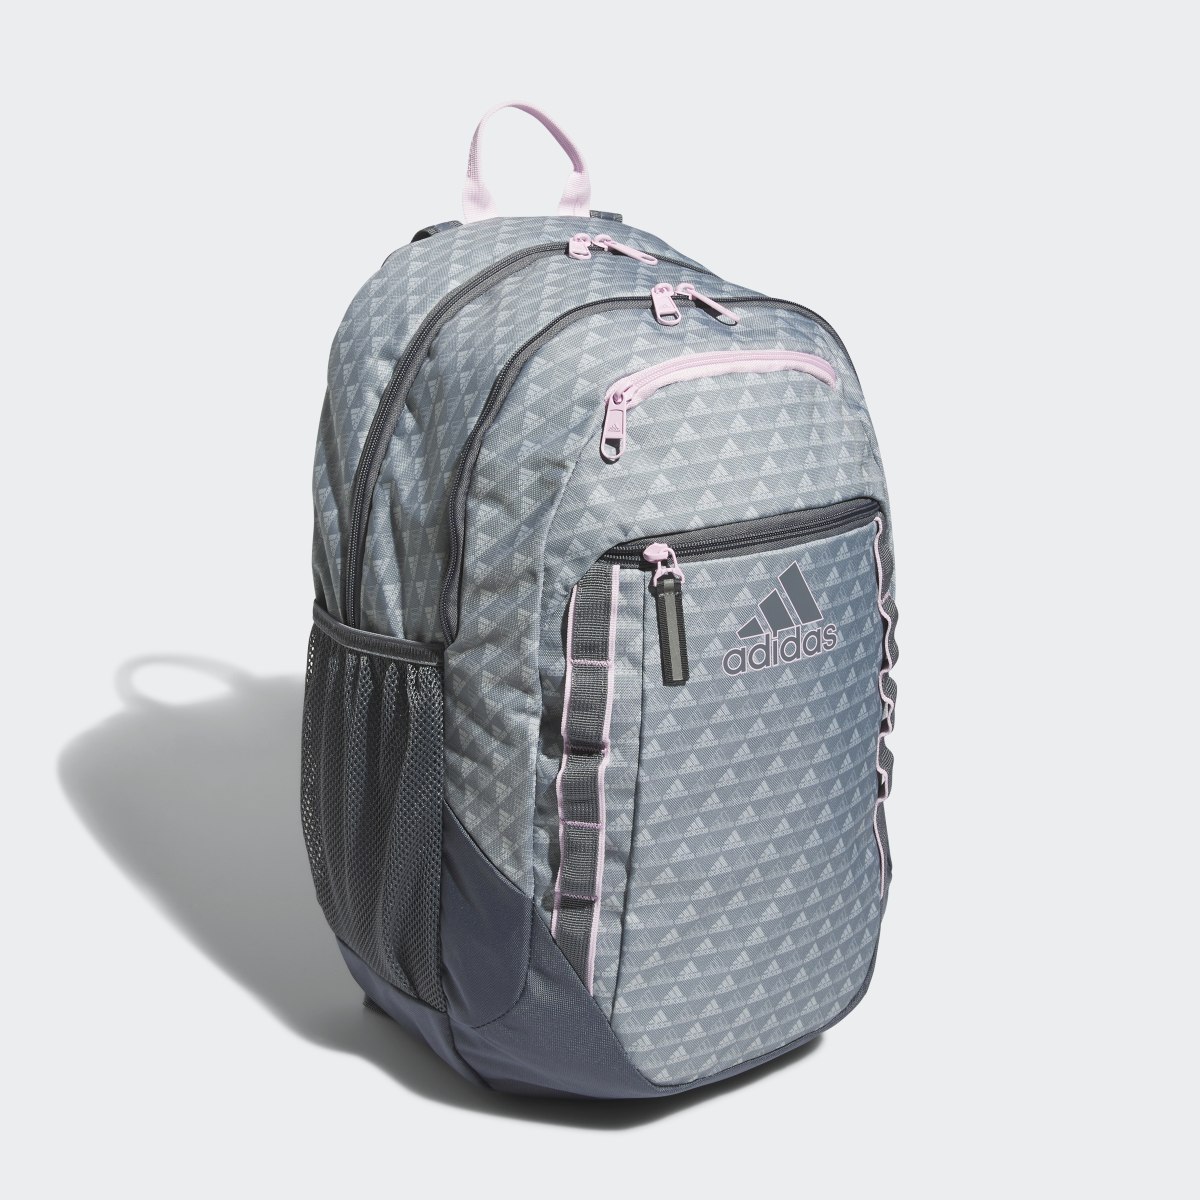 Adidas Excel Backpack. 4